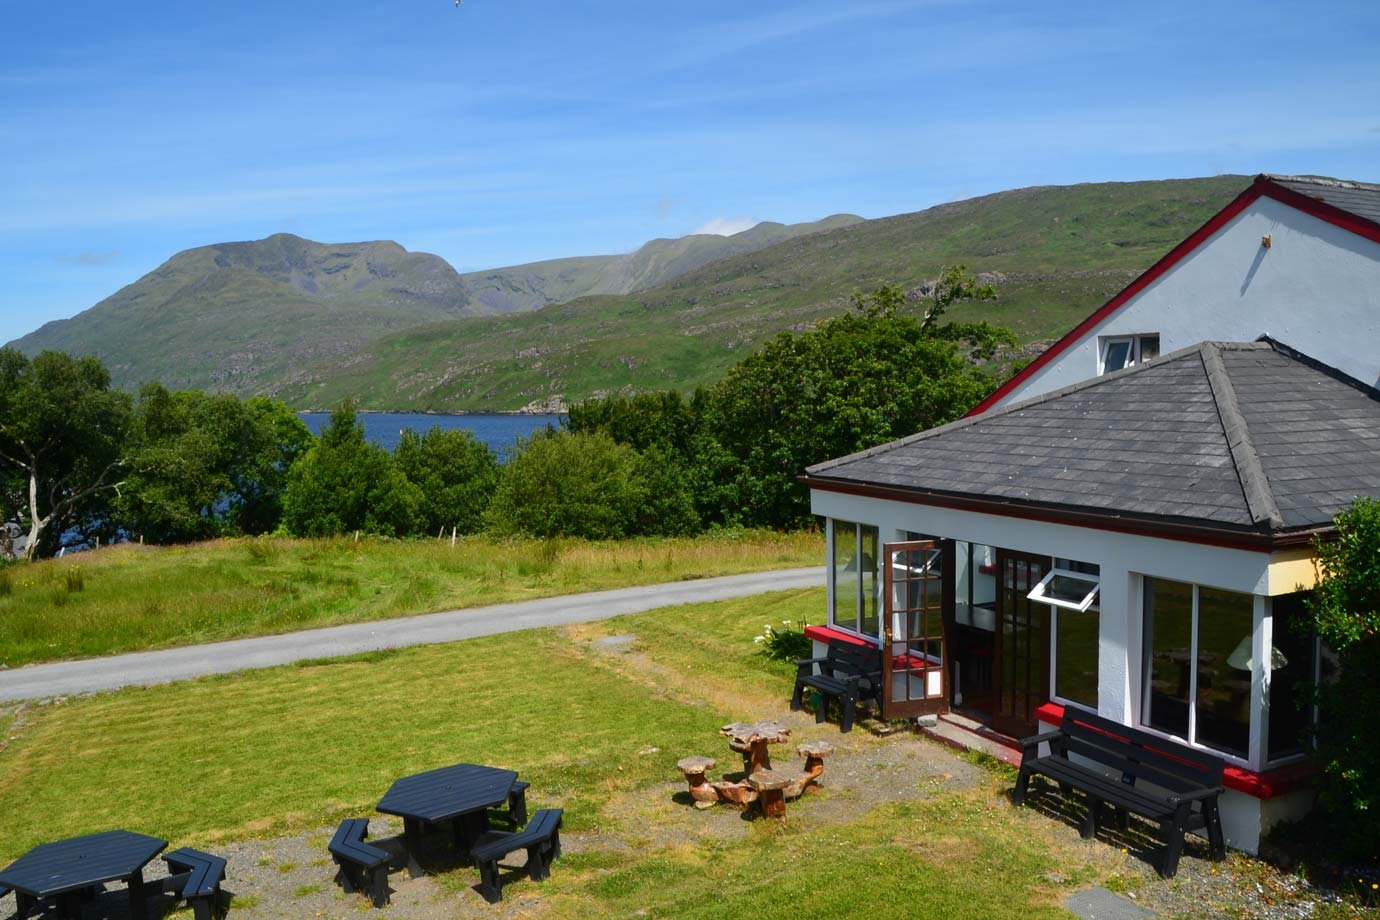 View of Green Connemara Hills With Blue Sky, Sea. Hostel with Picnic Table